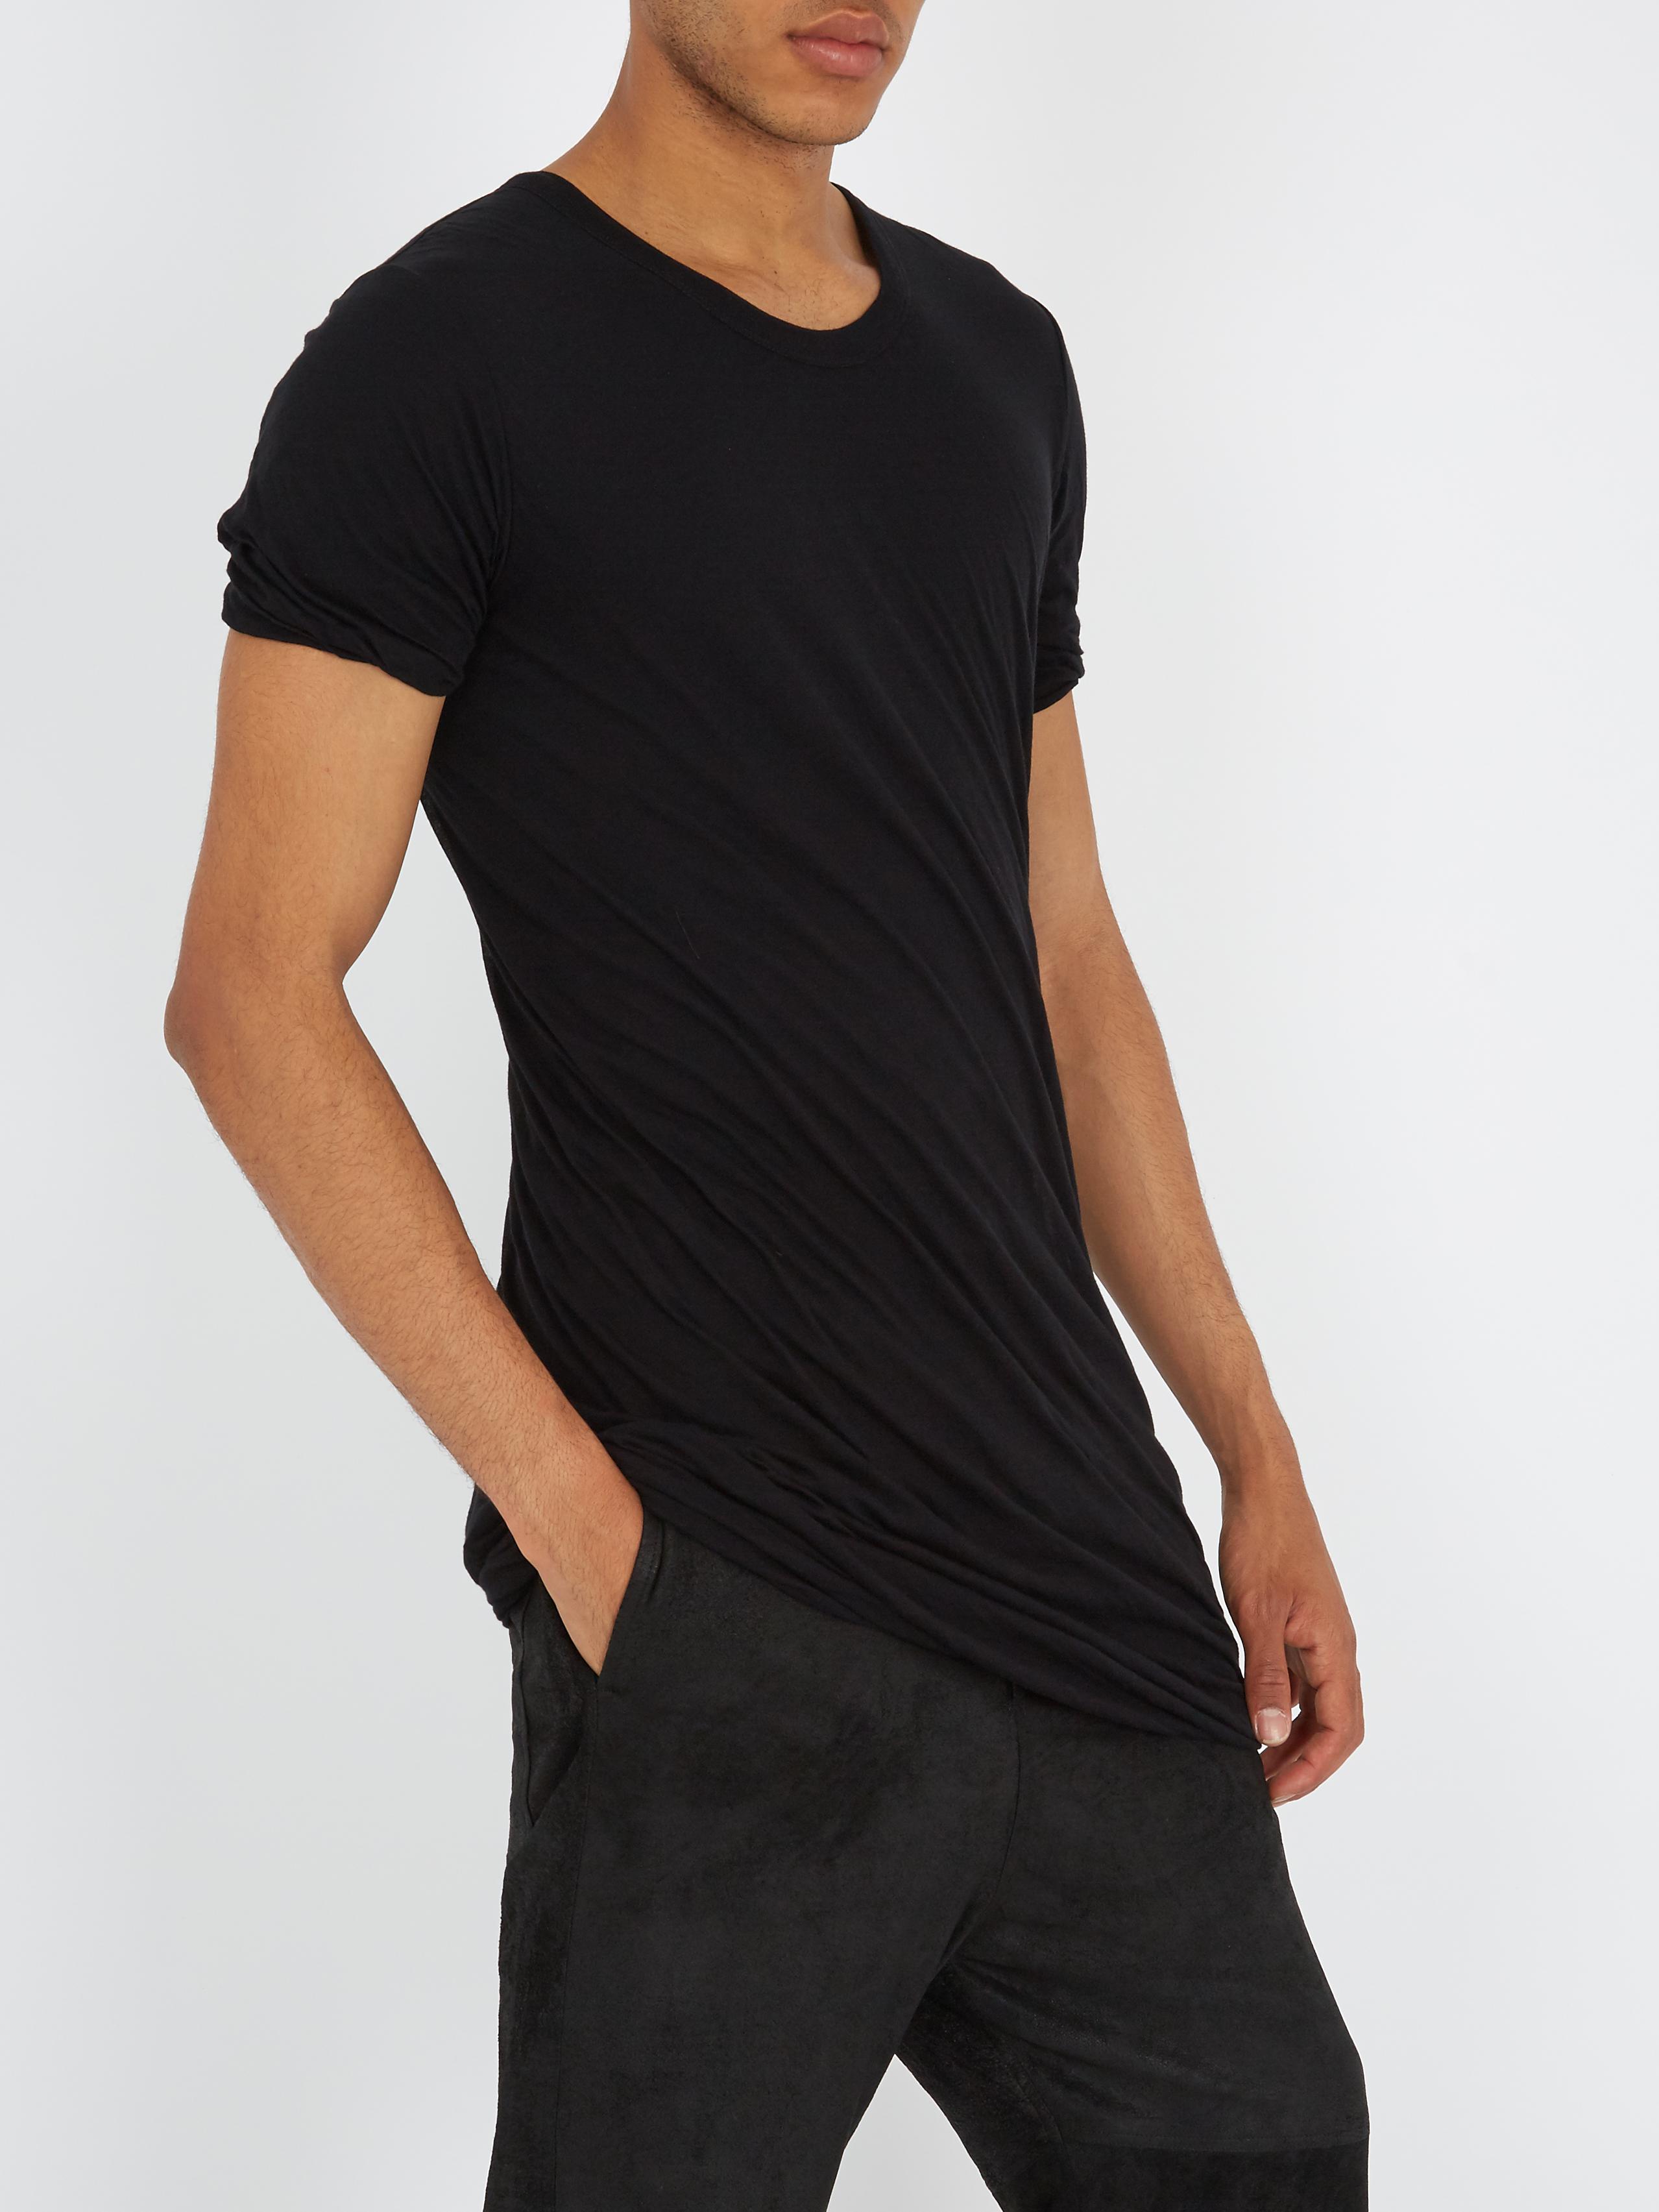 Rick Owens Double-layered Cotton T-shirt in Black for Men - Lyst